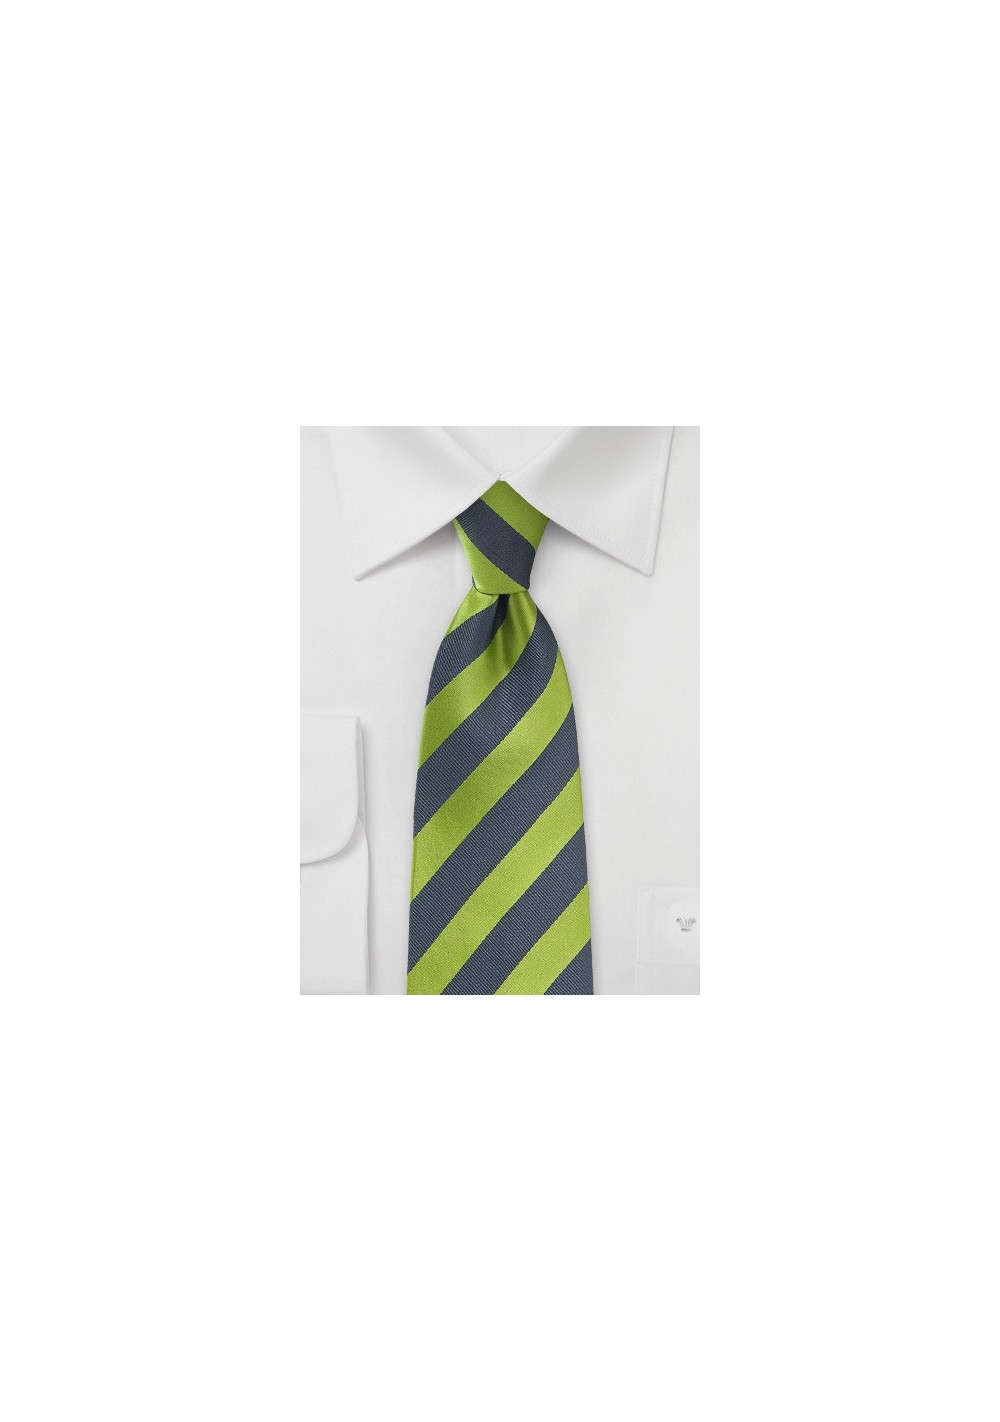 Striped Tie in Fern Green and Charcoal